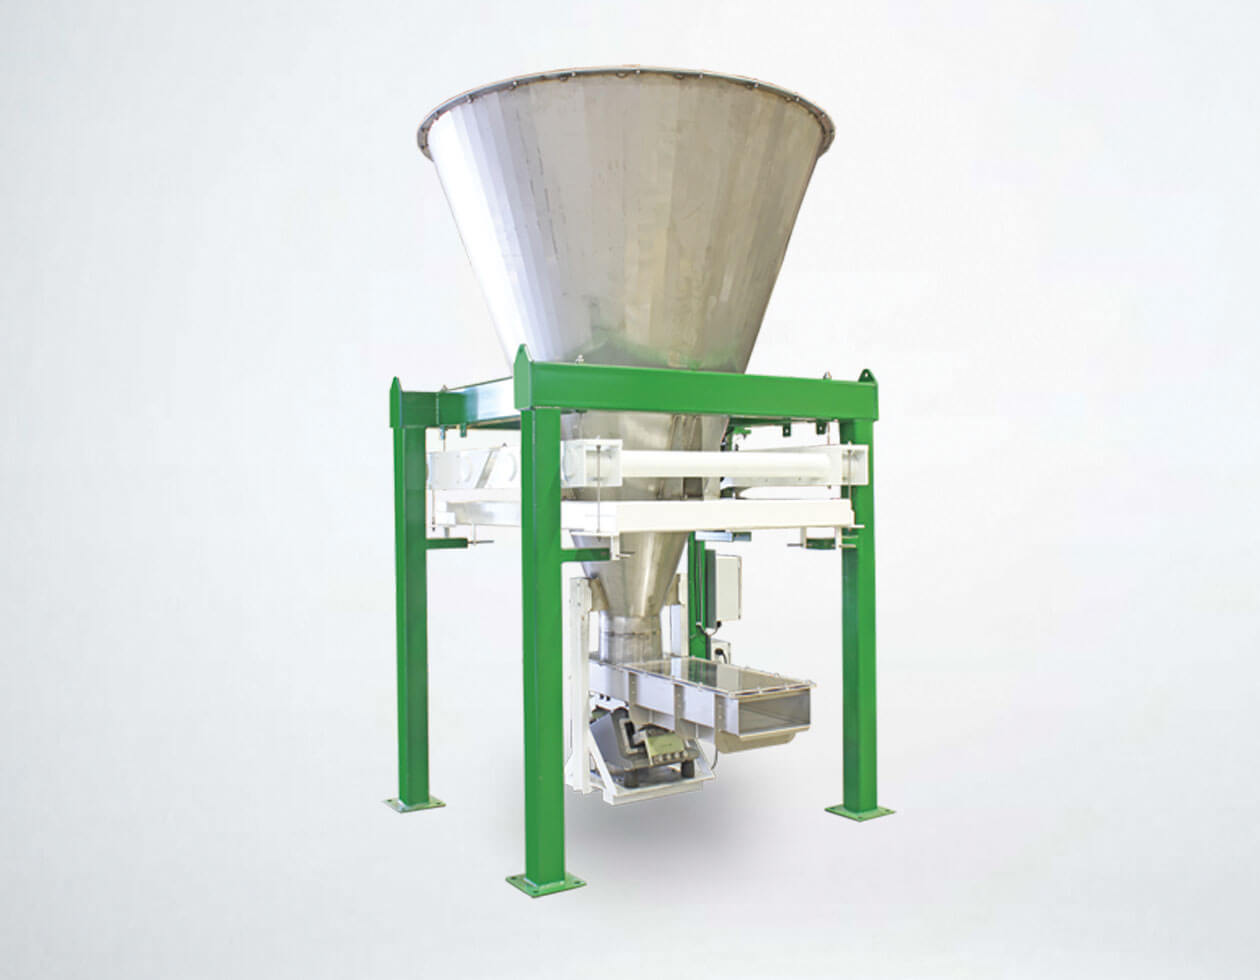 Loss-in-Weight Vibratory Feeder